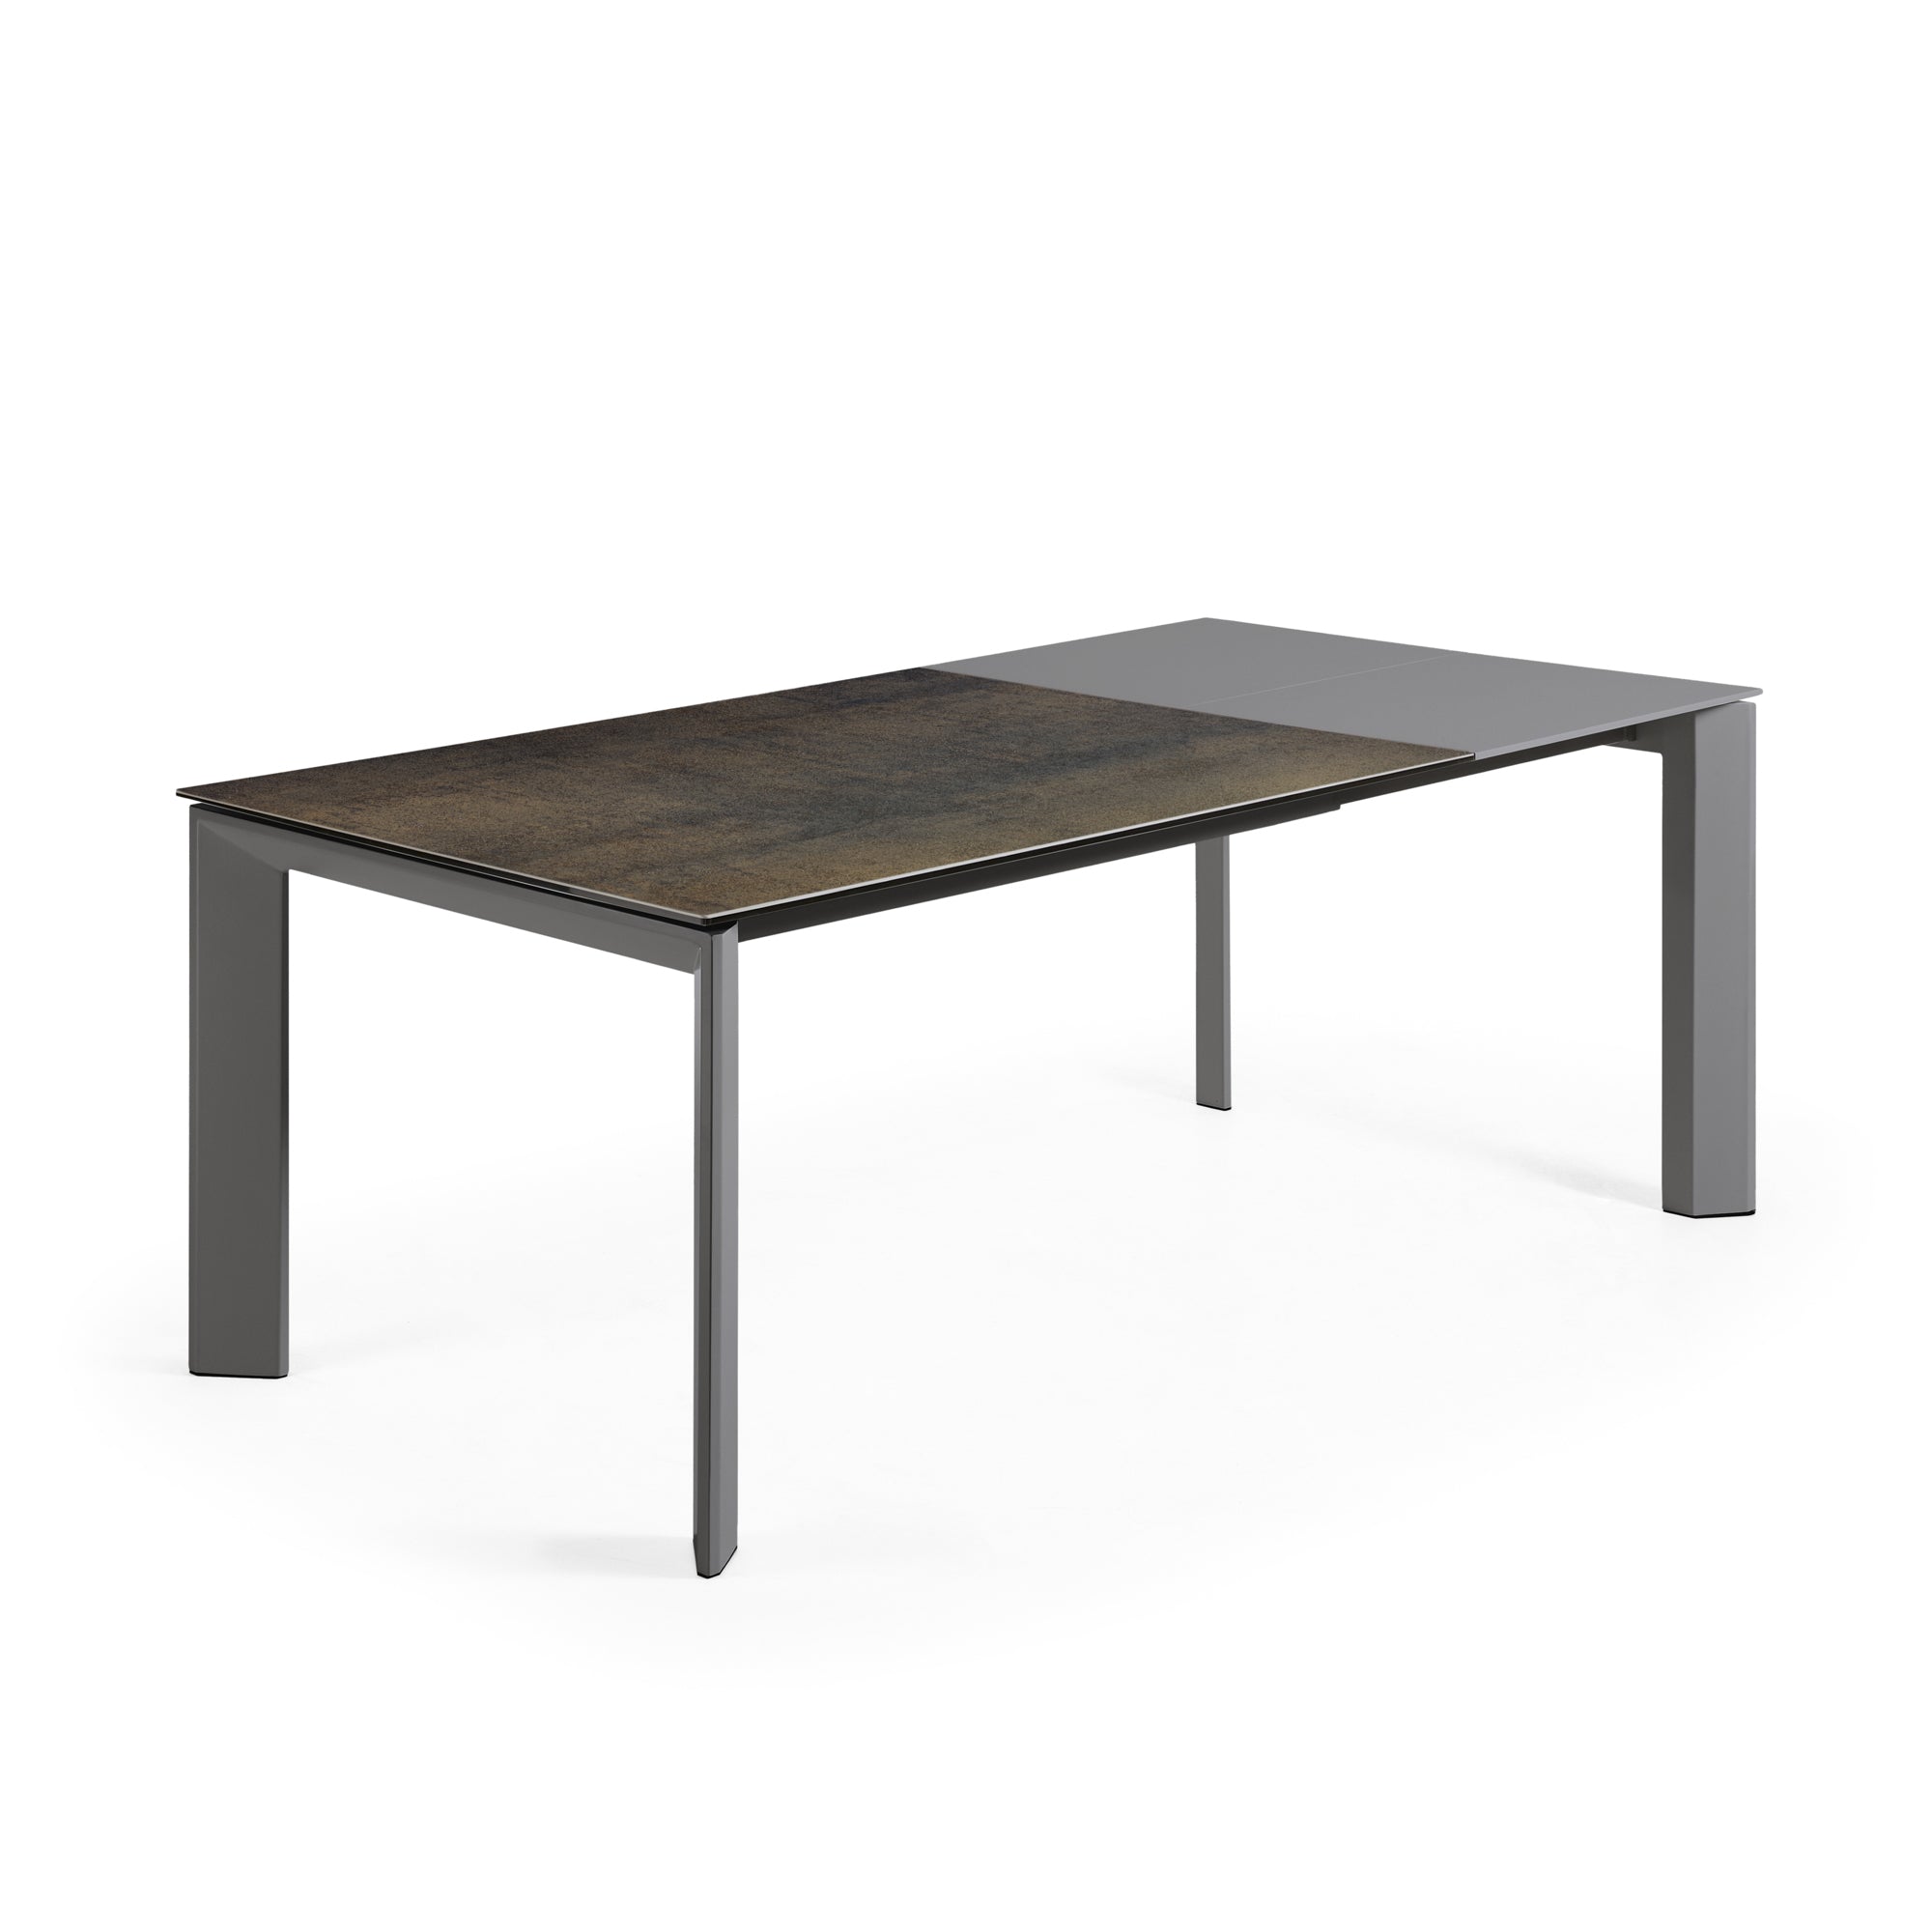 Axis extendable porcelain table with iron moss finish and dark gray steel legs, 140 (200) cm